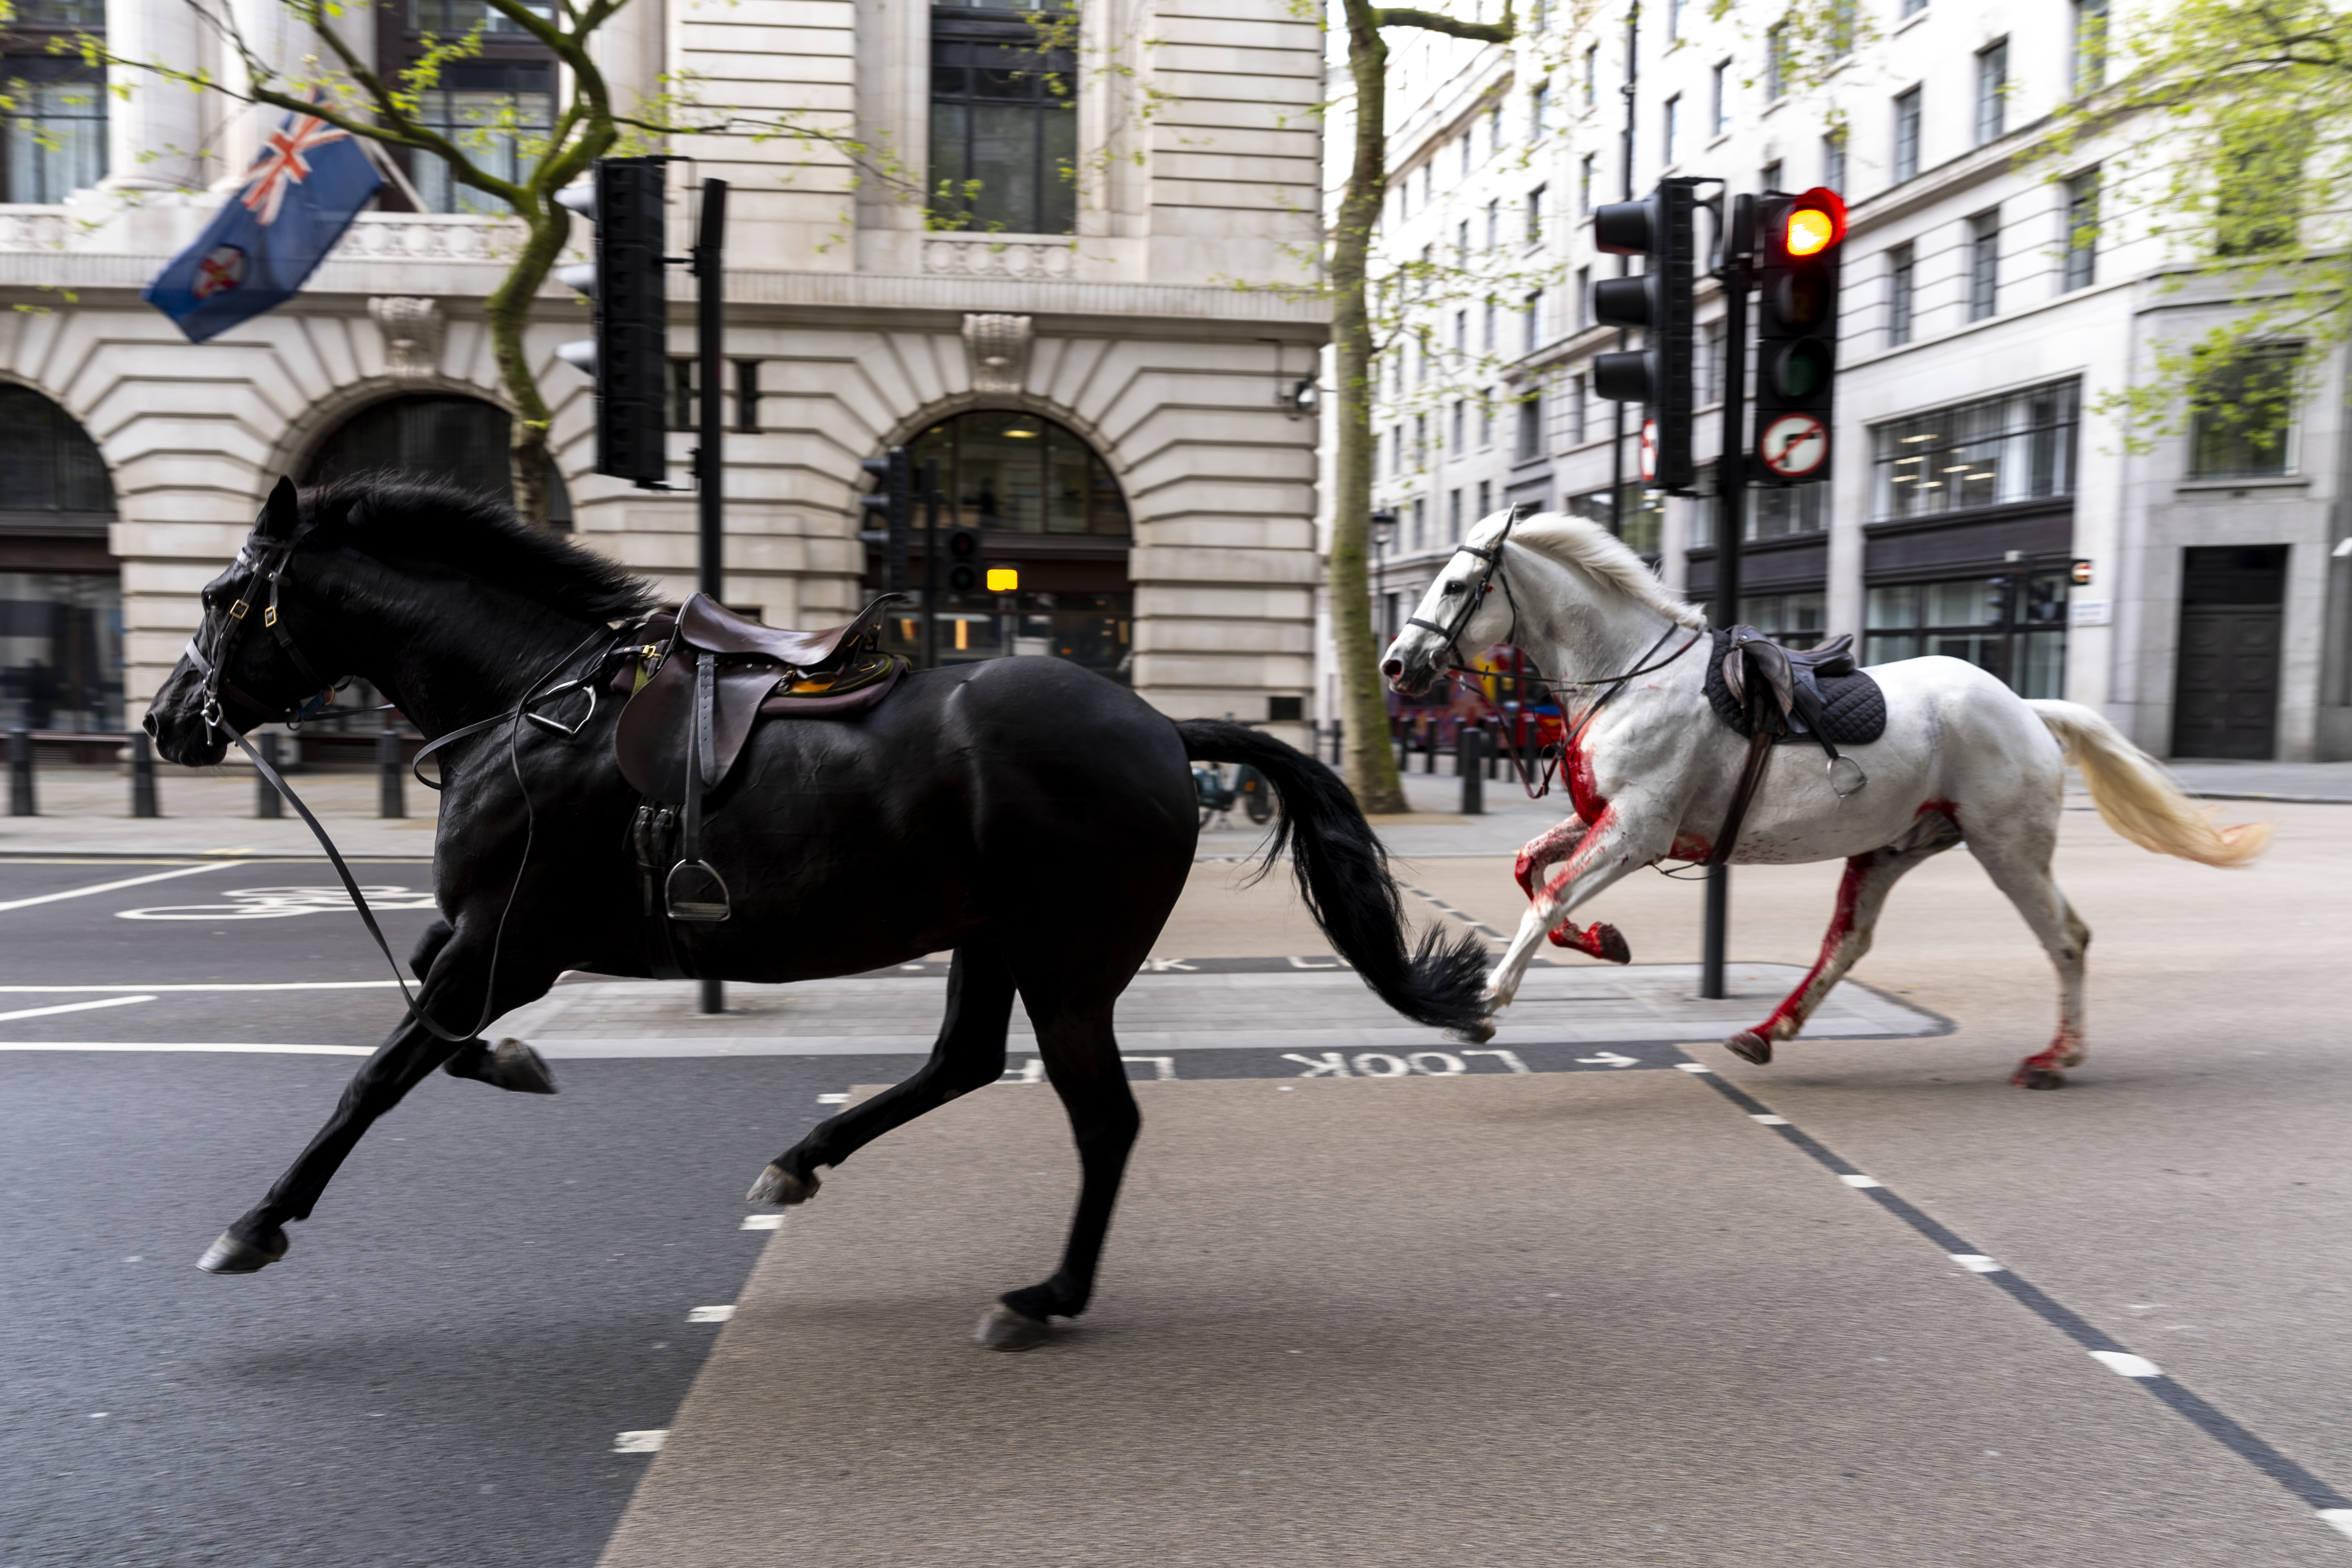 Quaker and Vida on the loose bolting through the streets of London near Aldwych